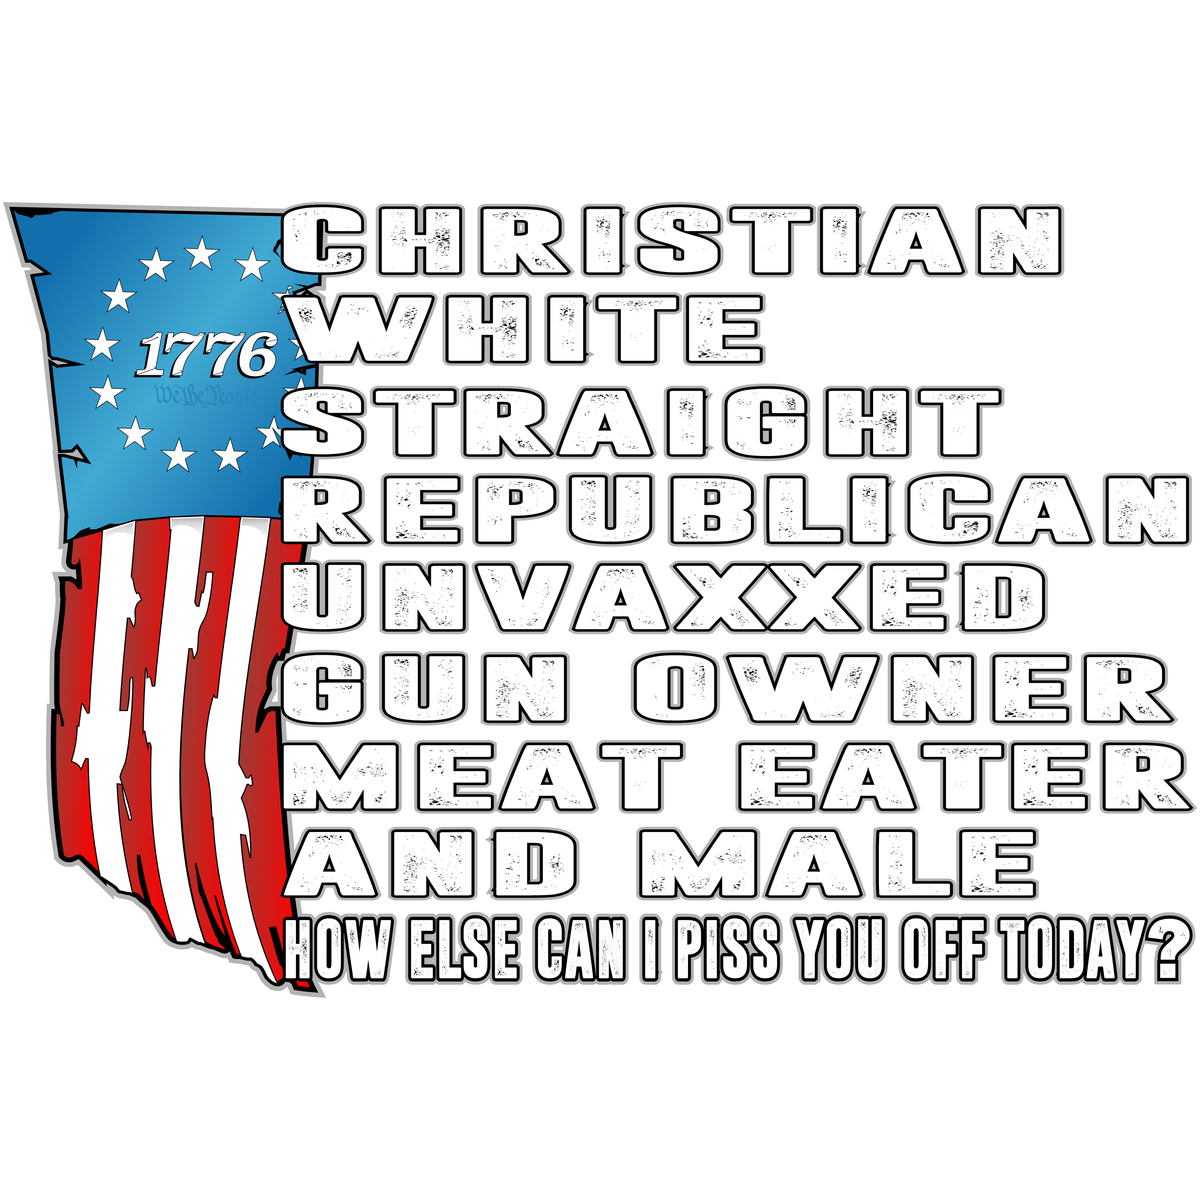 Christian - White - Republican -  Piss You Off Today - PermaSticker - Free Shipping - Application Video in Description